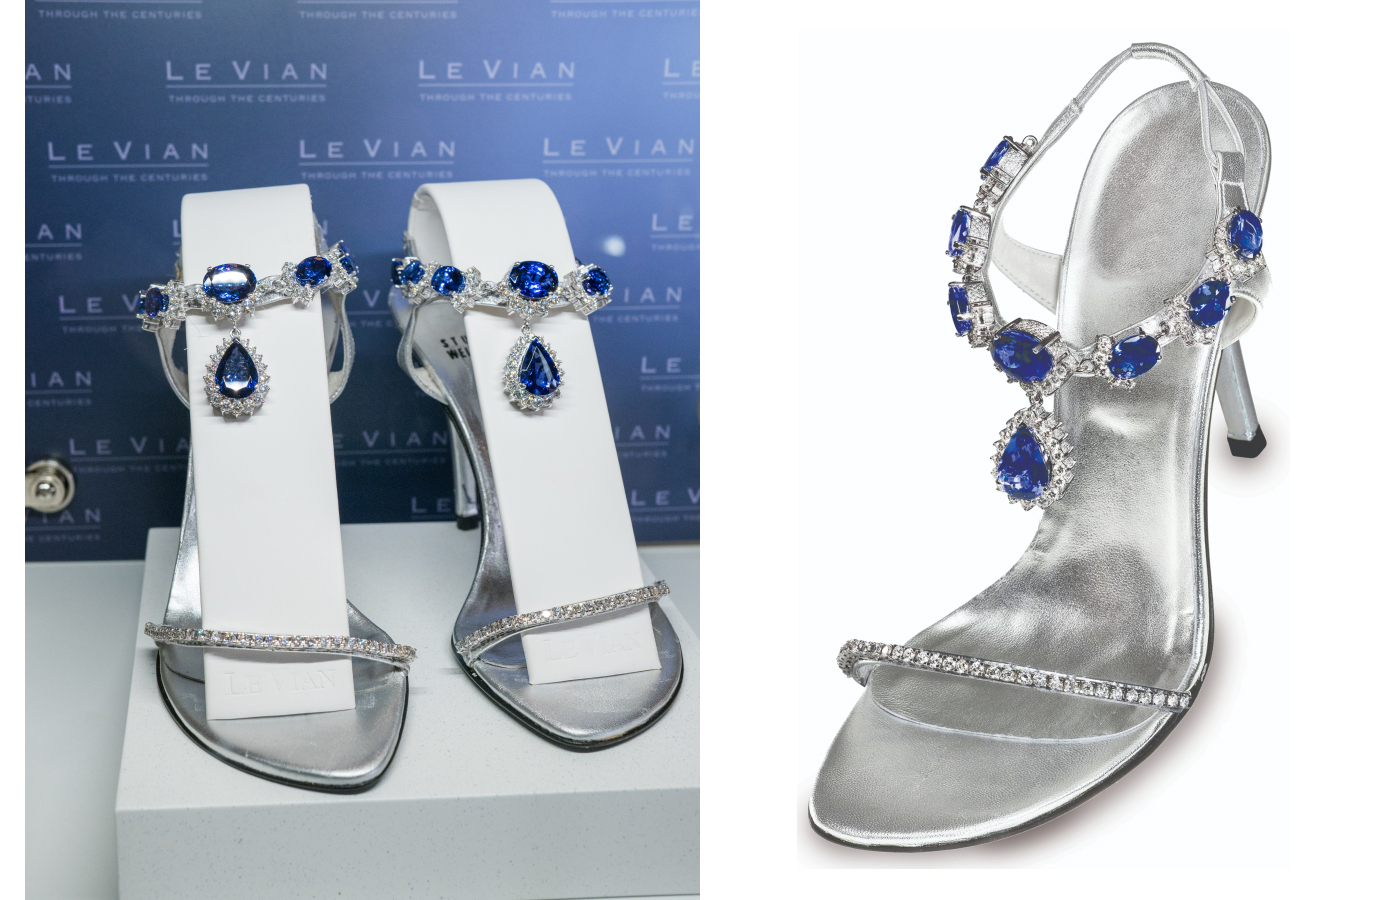 Le Vian X Stuart Weitzman one of a kind pair of Tanzanite Heels in platinum, white gold, feature 85-cts of tanzanite and 28-cts of diamond